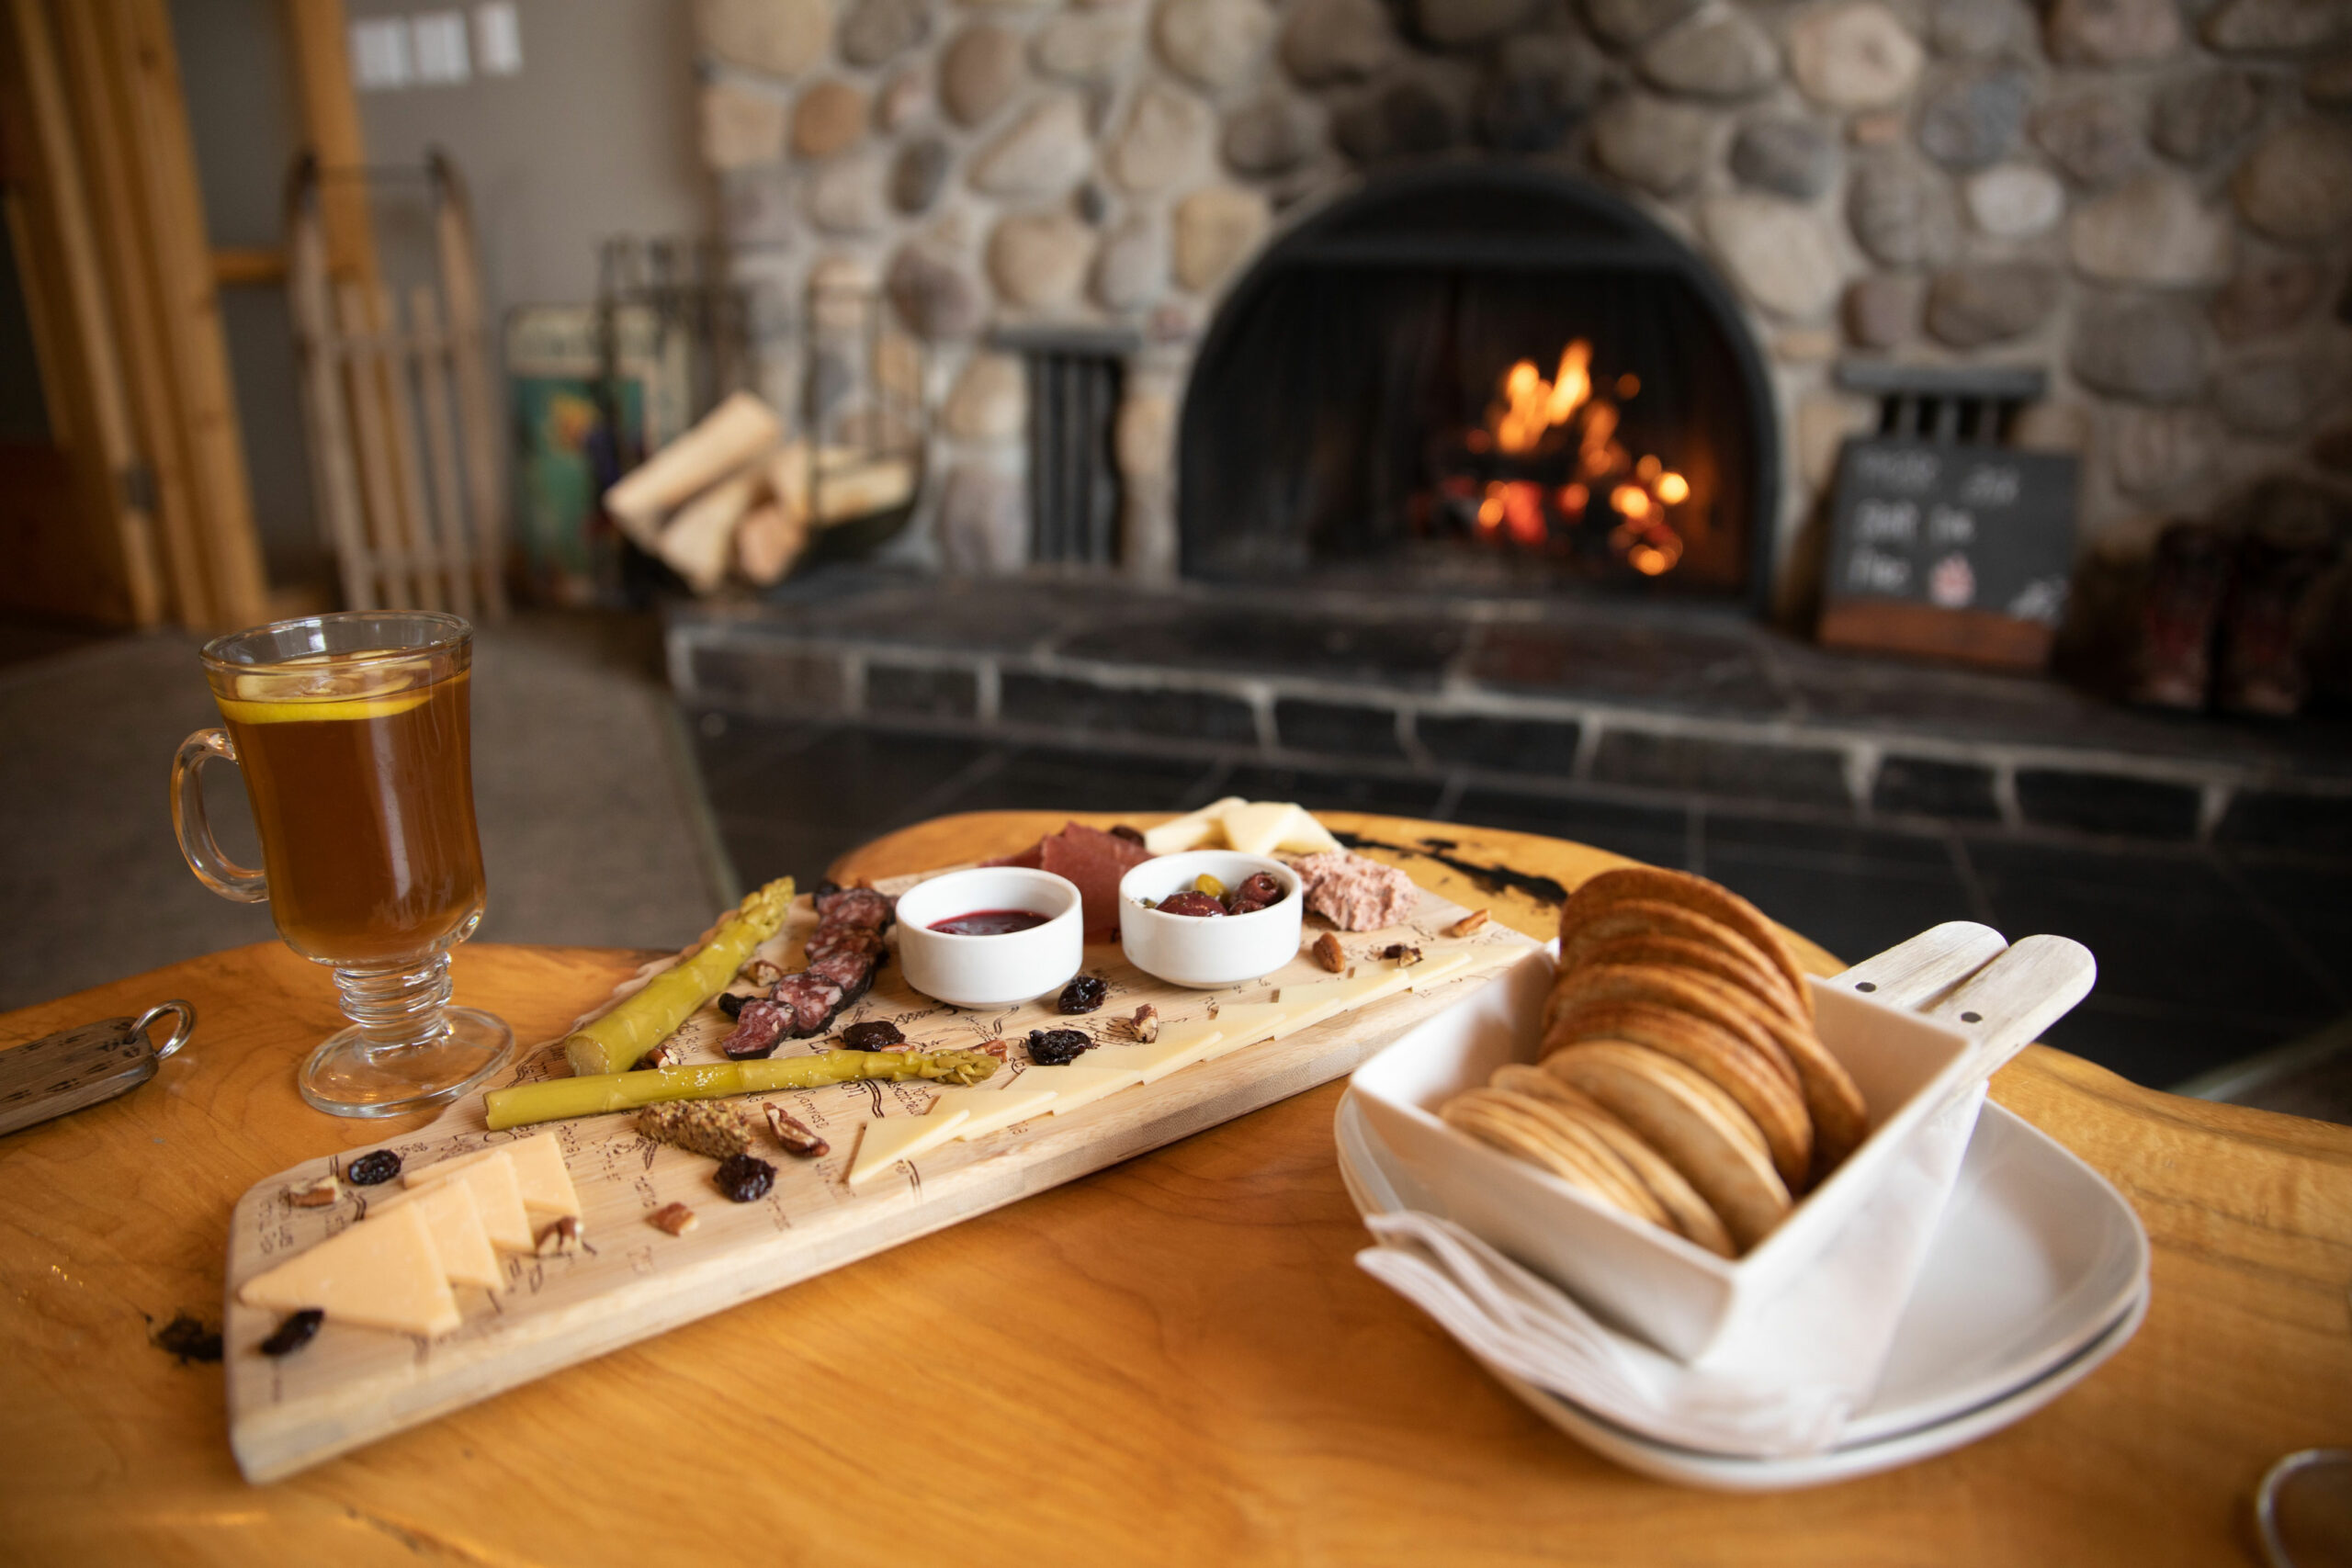 A delicious looking charcuterie in front of a fireplace at Mount Engadine Lodge.